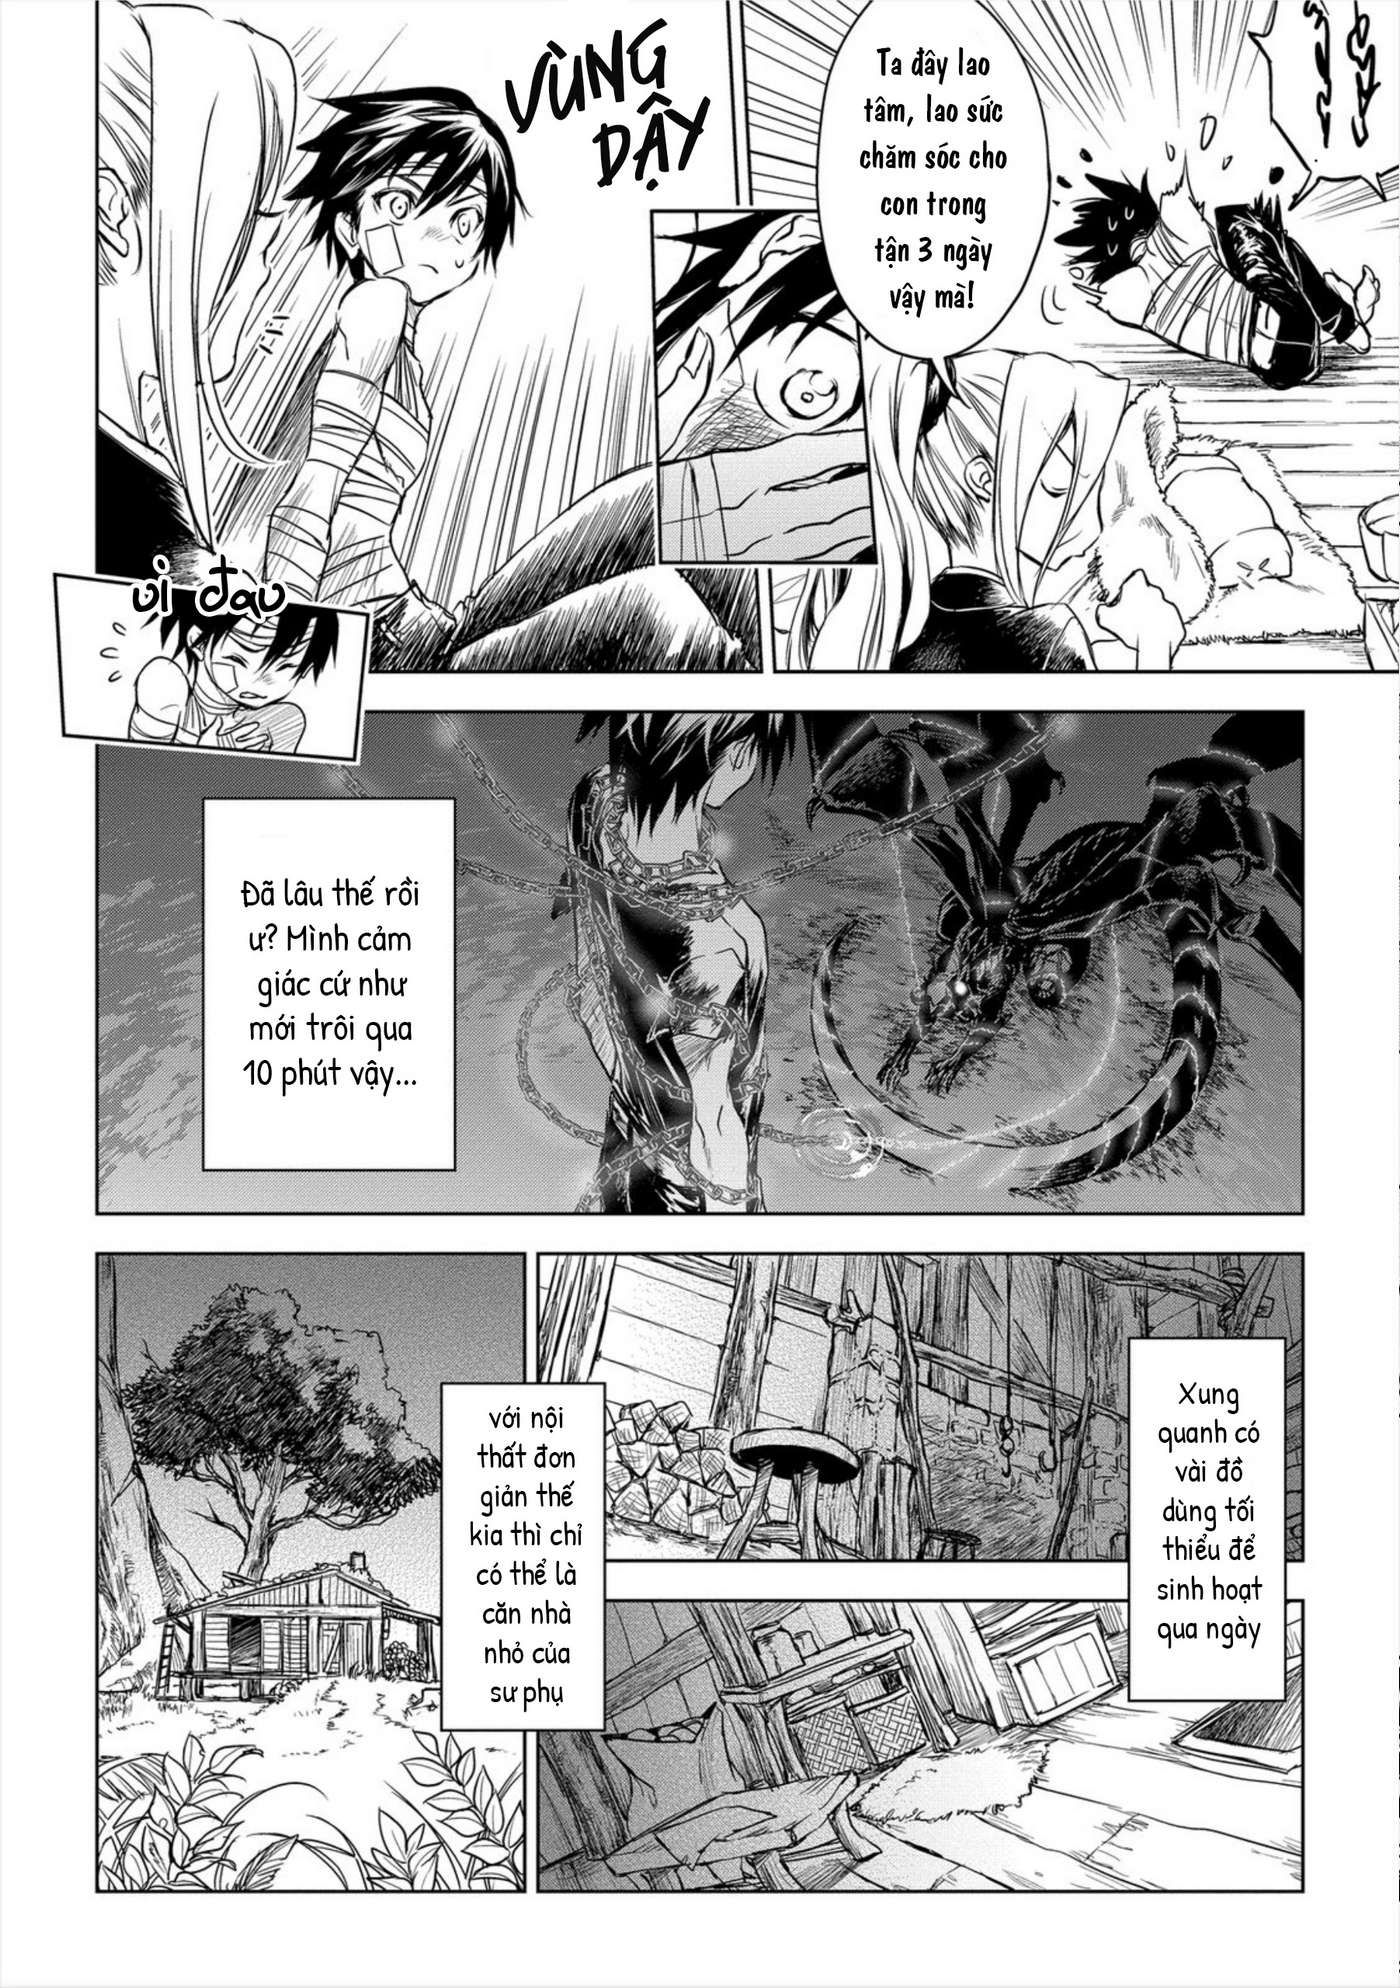 Ori Of The Dragon Chain - "Heart" In The Mind (Update Chap 19) - Trang 2